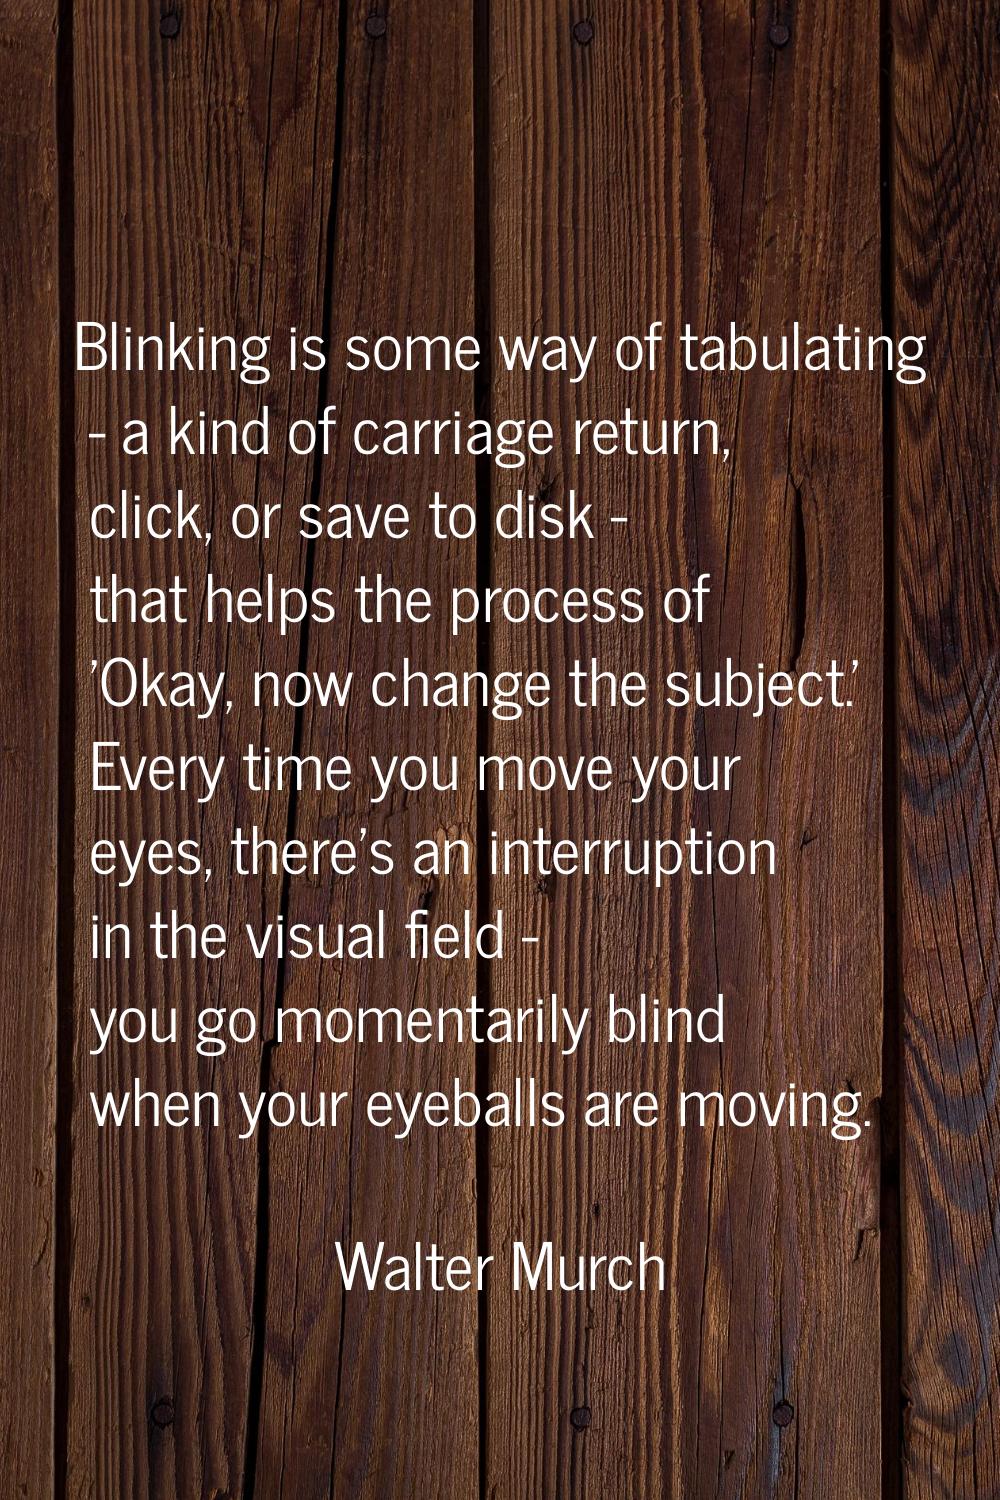 Blinking is some way of tabulating - a kind of carriage return, click, or save to disk - that helps